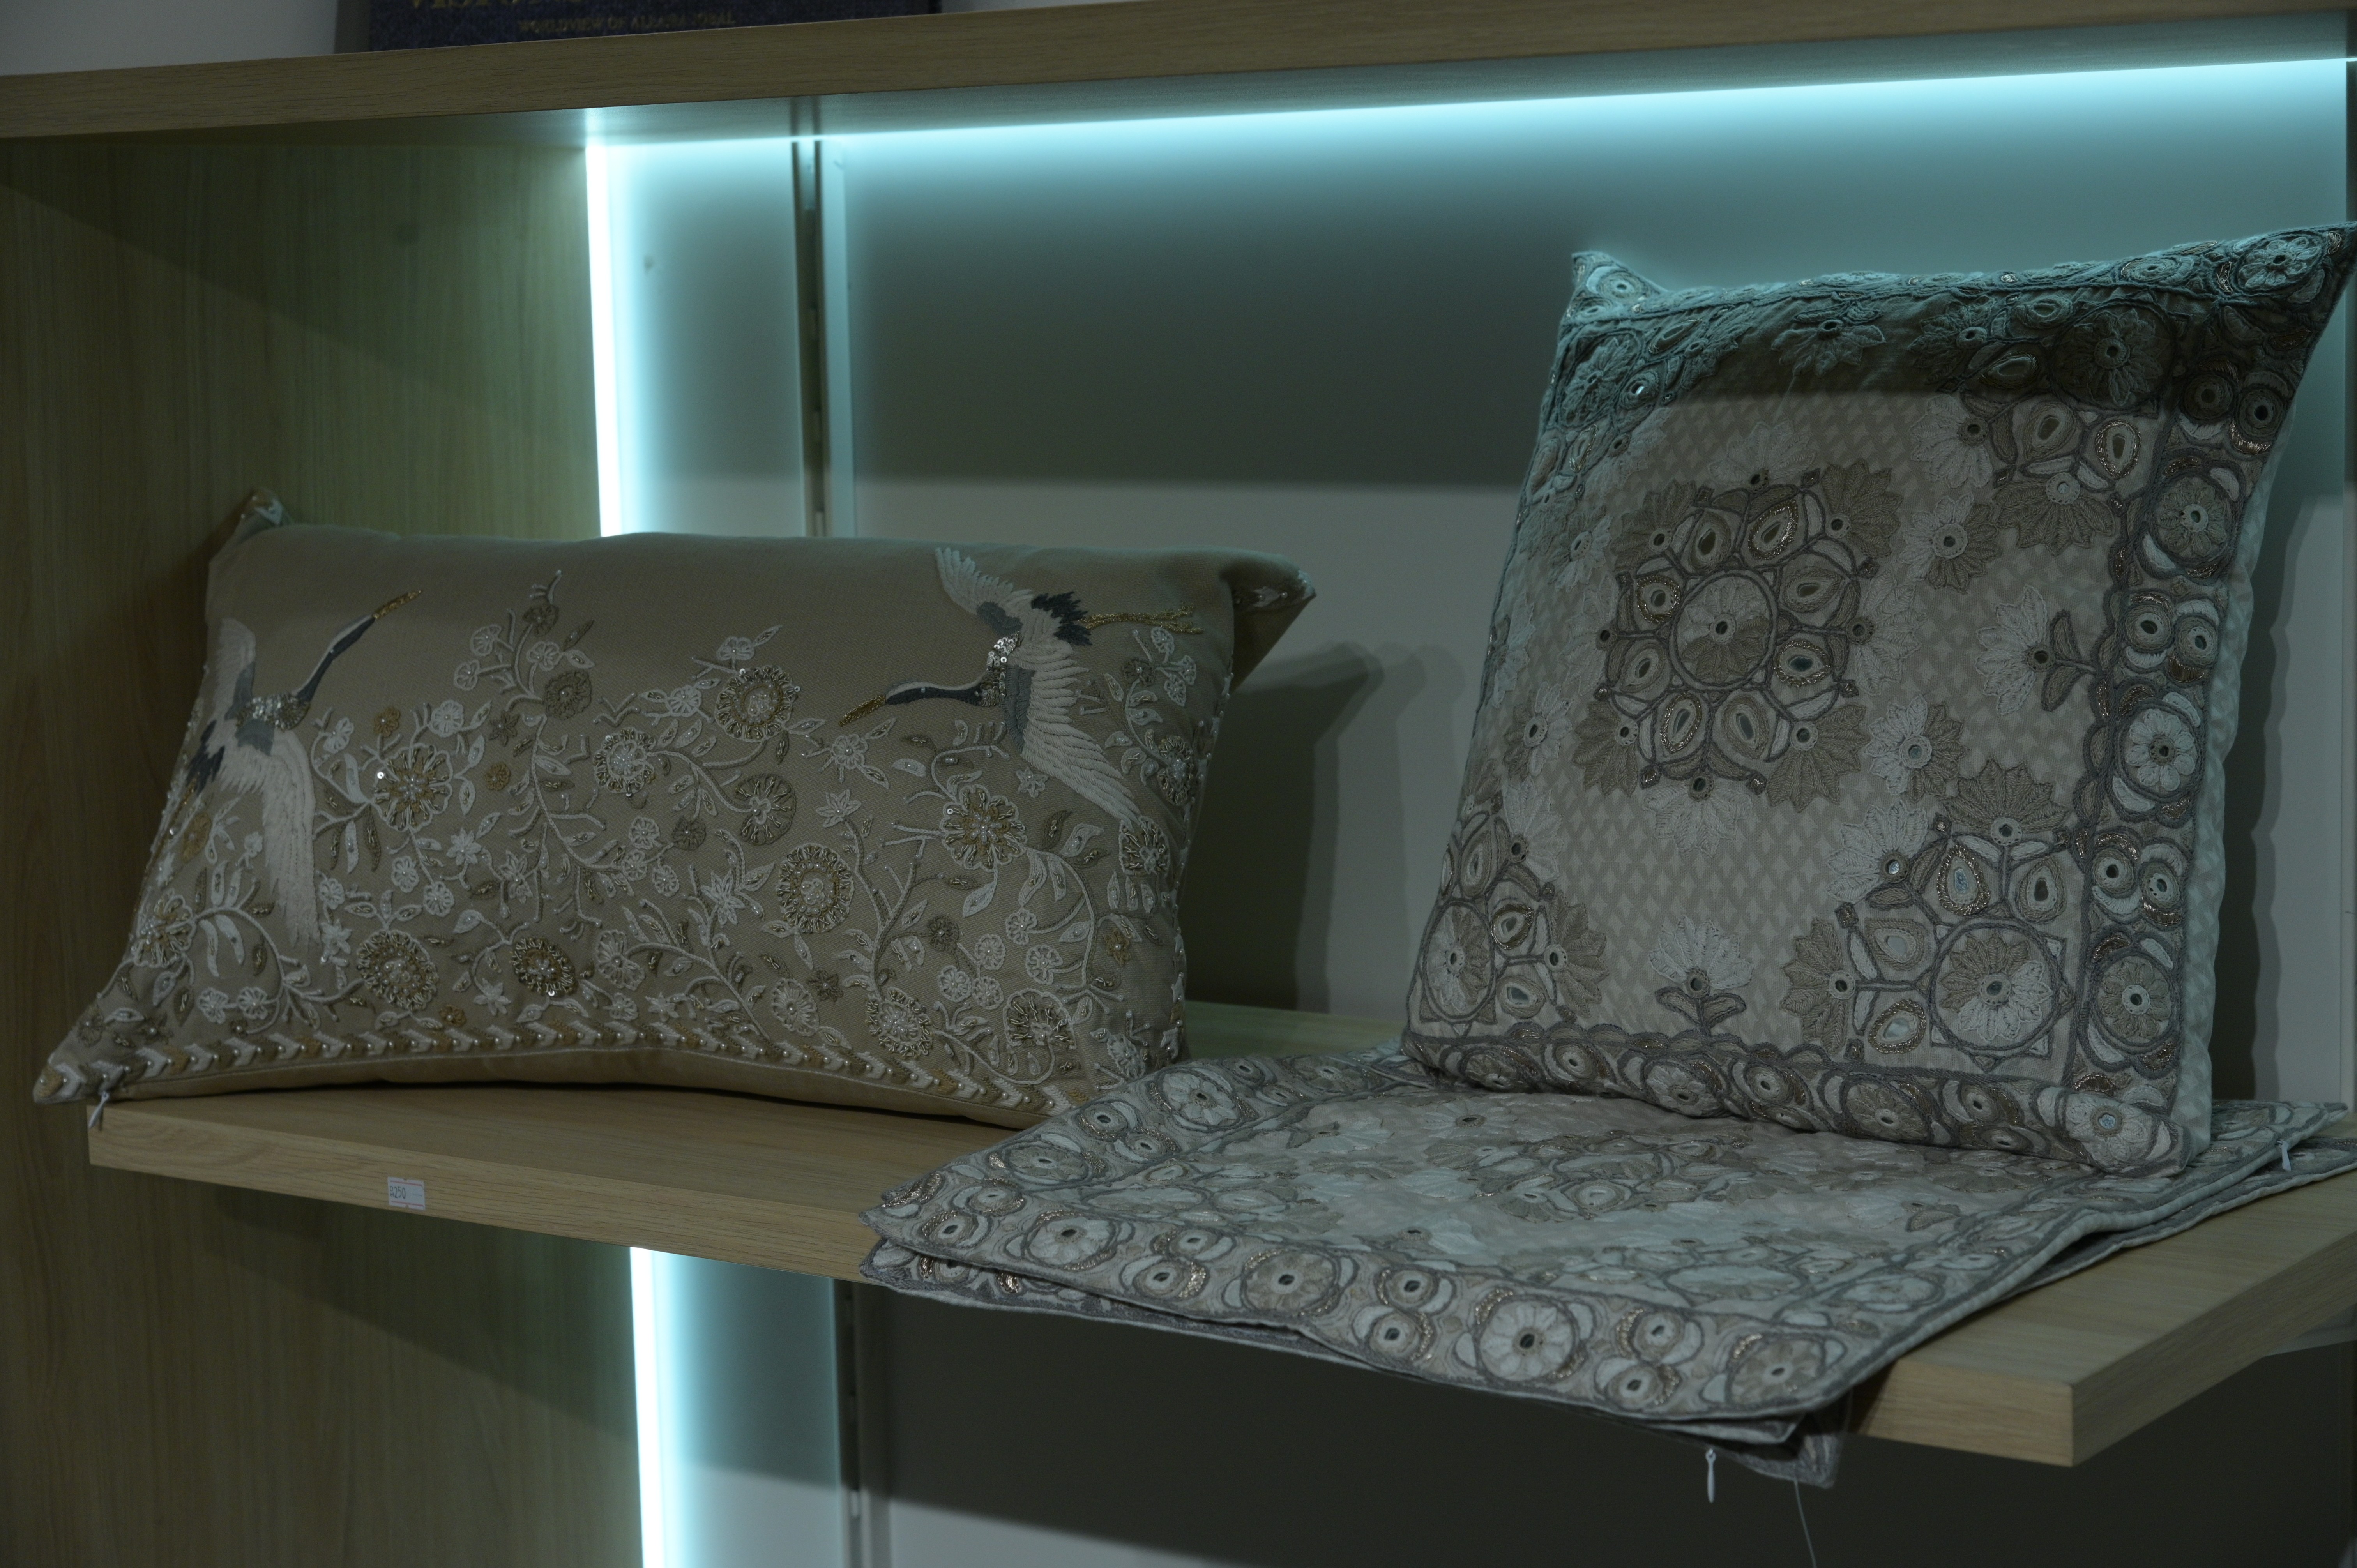 An embroided cushions and pillow case